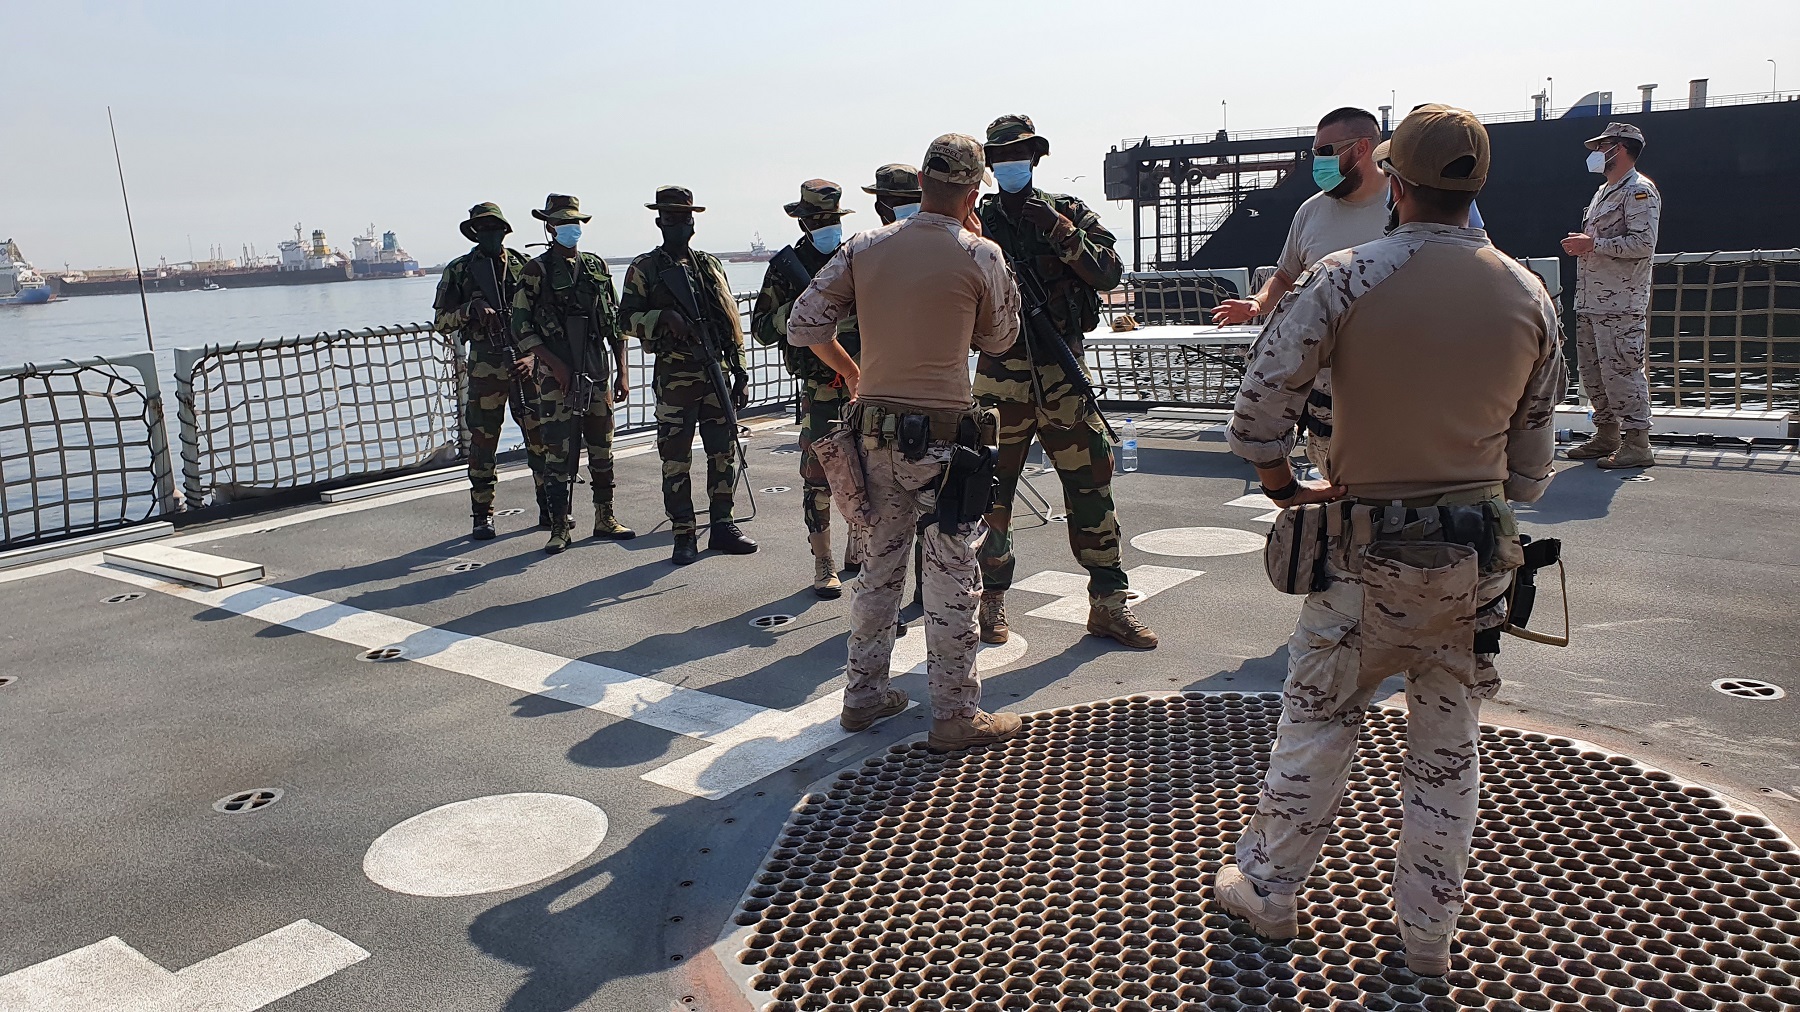 Training on VBSS missions